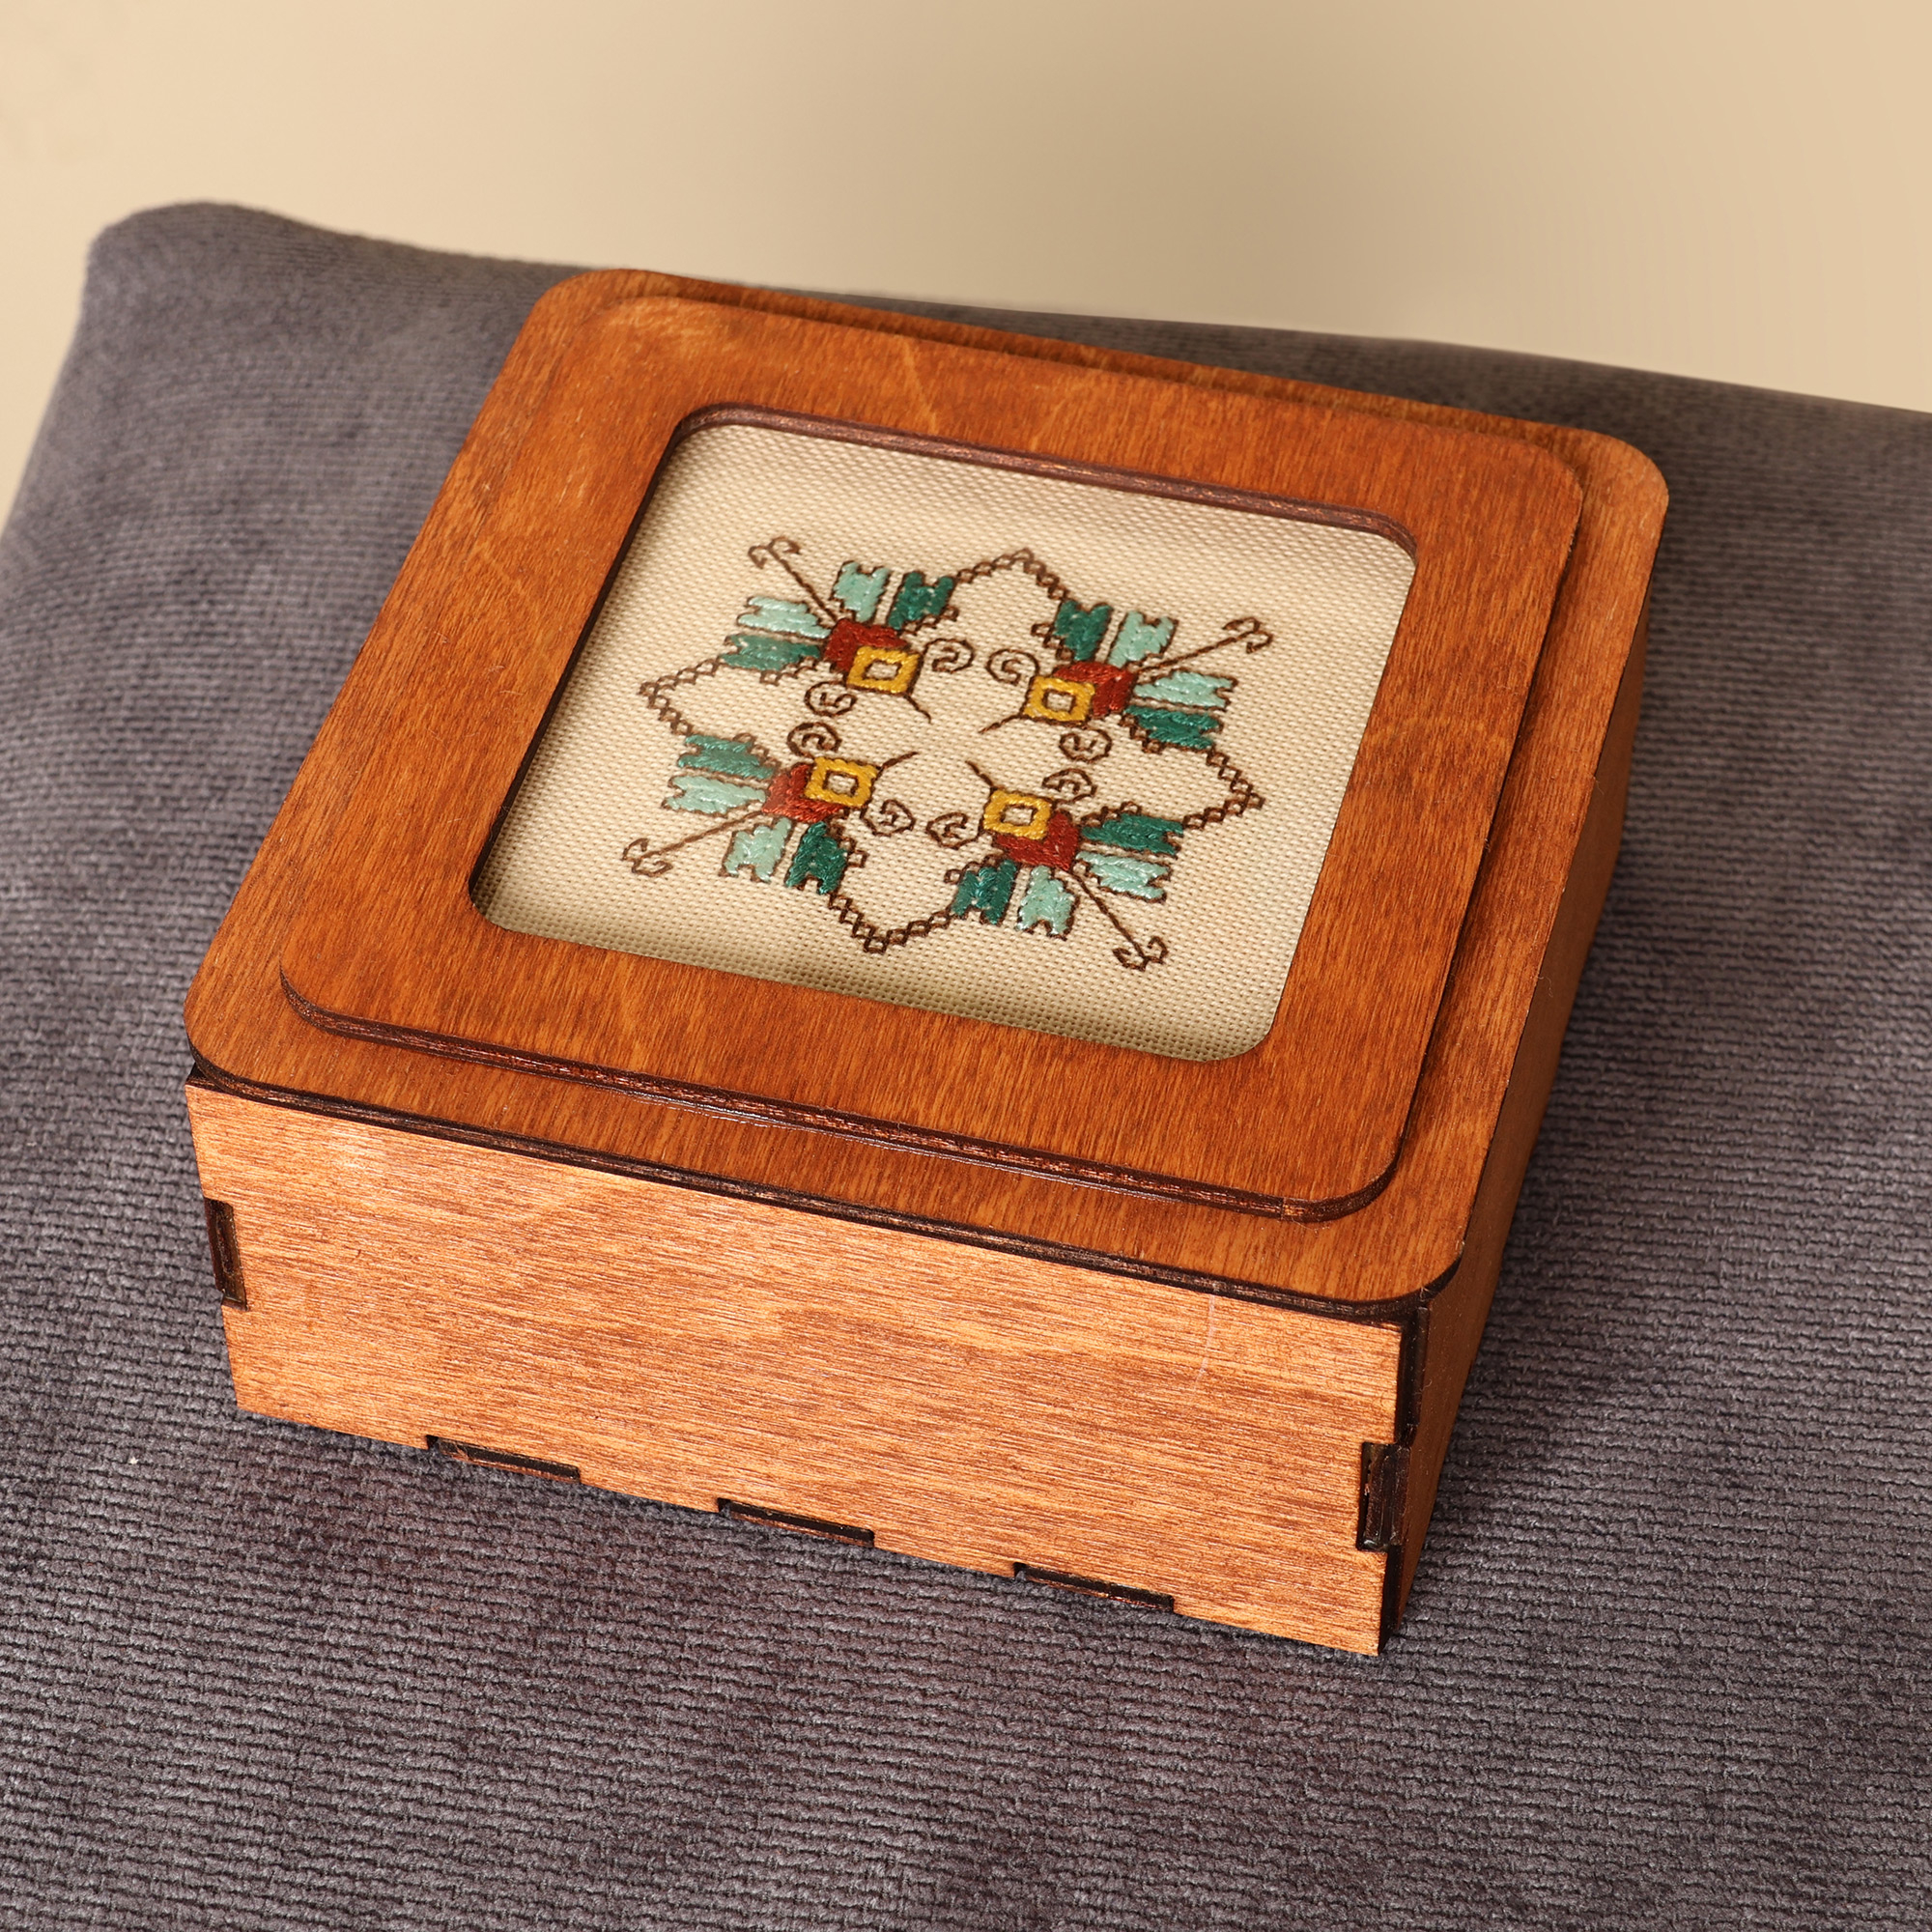 Handmade Wood Jewelry Box Topped by Cotton Embroidered Motif, 'Charming  Lotus